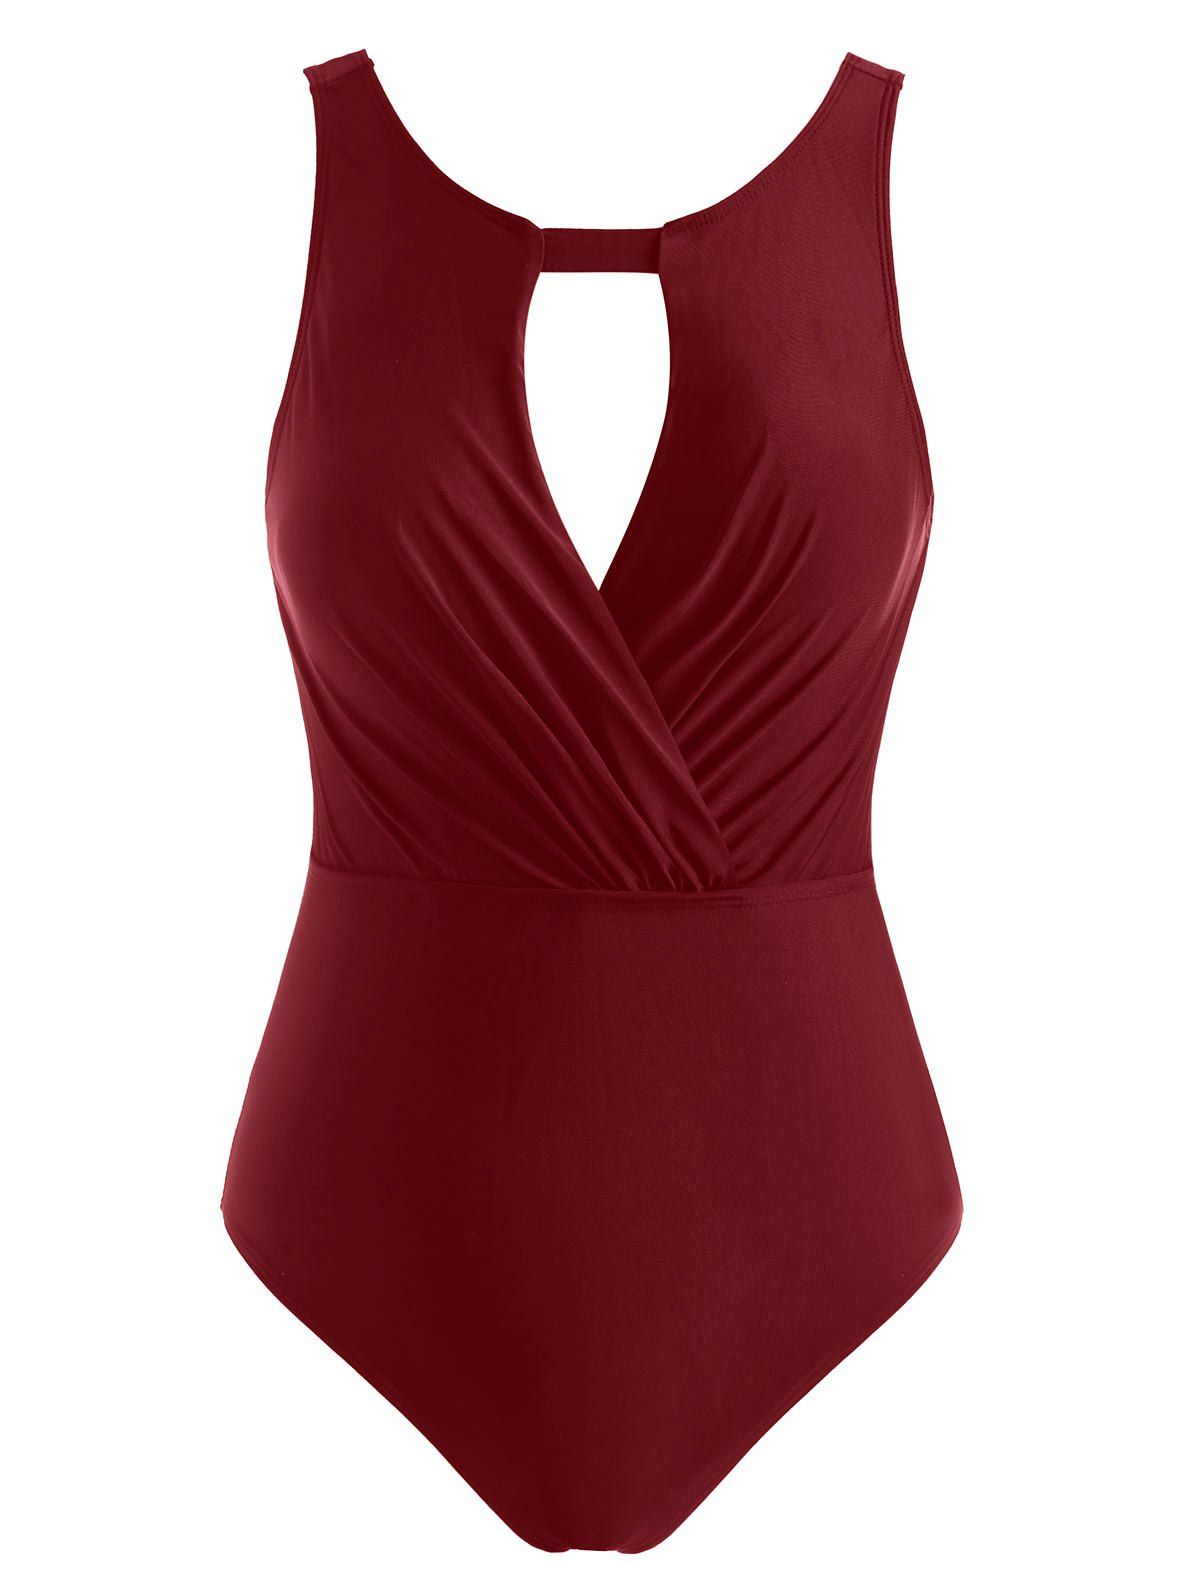 Hollow Out Open Back Ruched One-piece Swimsuit - DEEP RED L